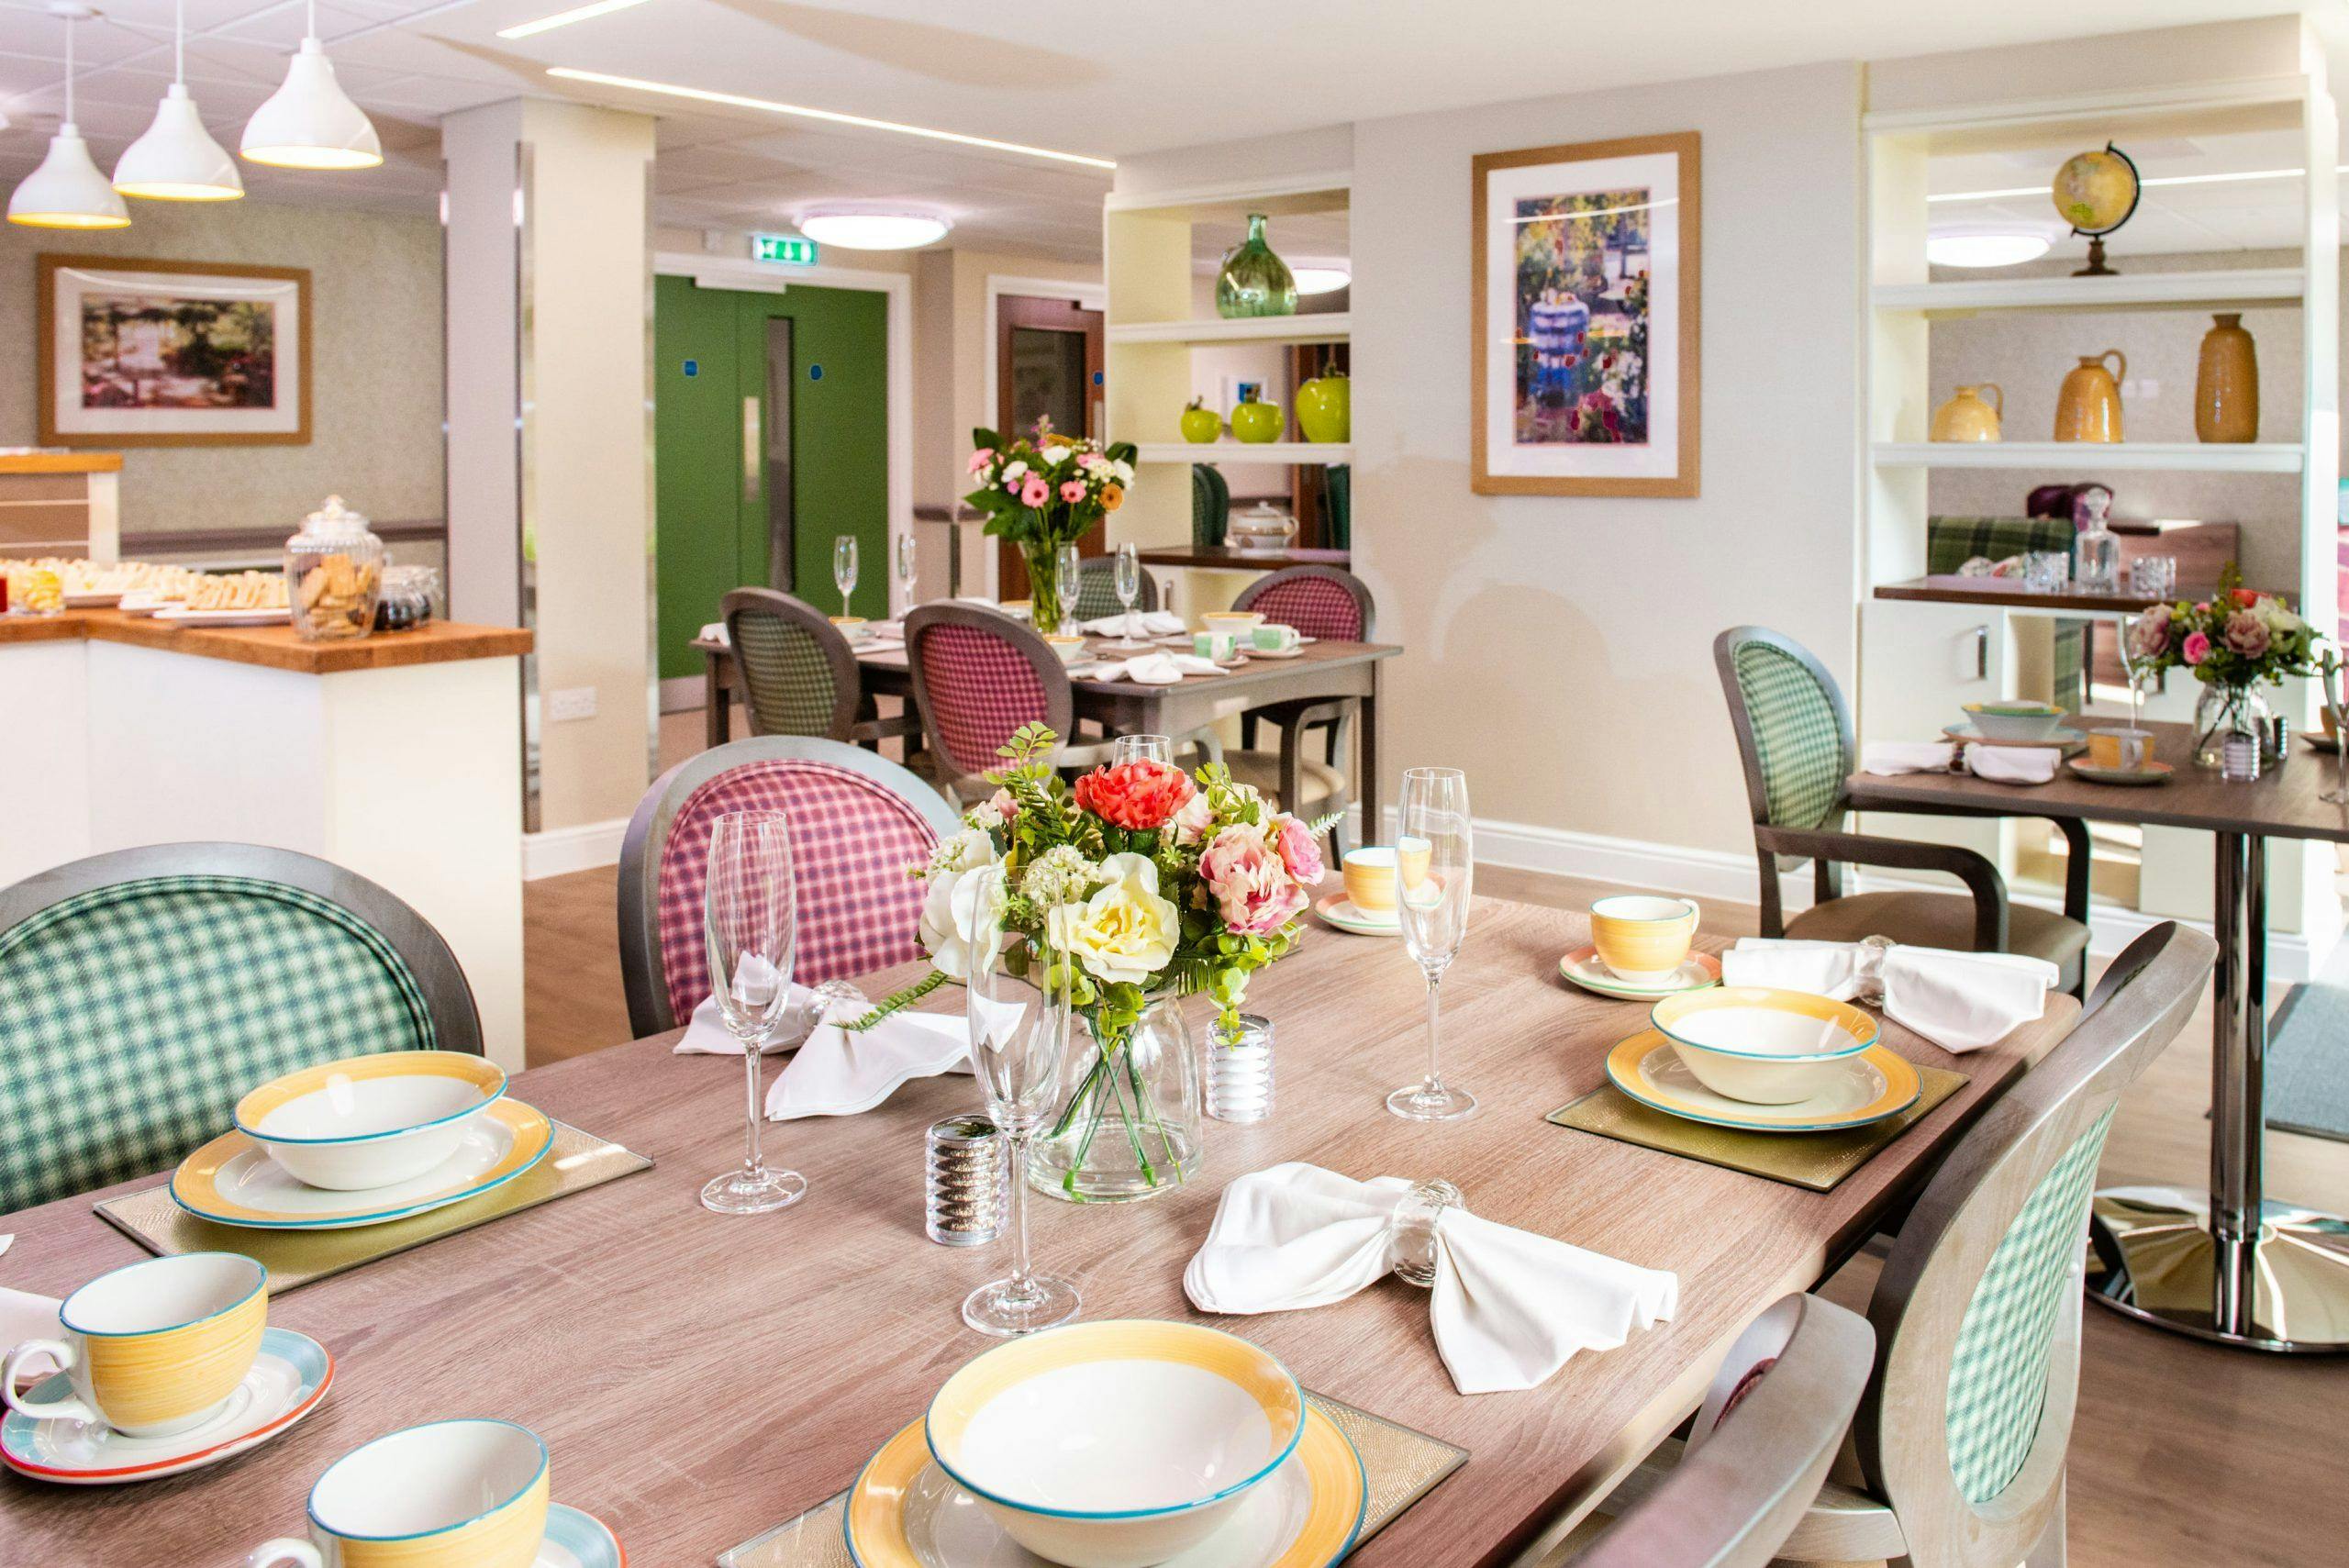 Dining Table of Heanor Park Care Home in Ripley, Derbyshire